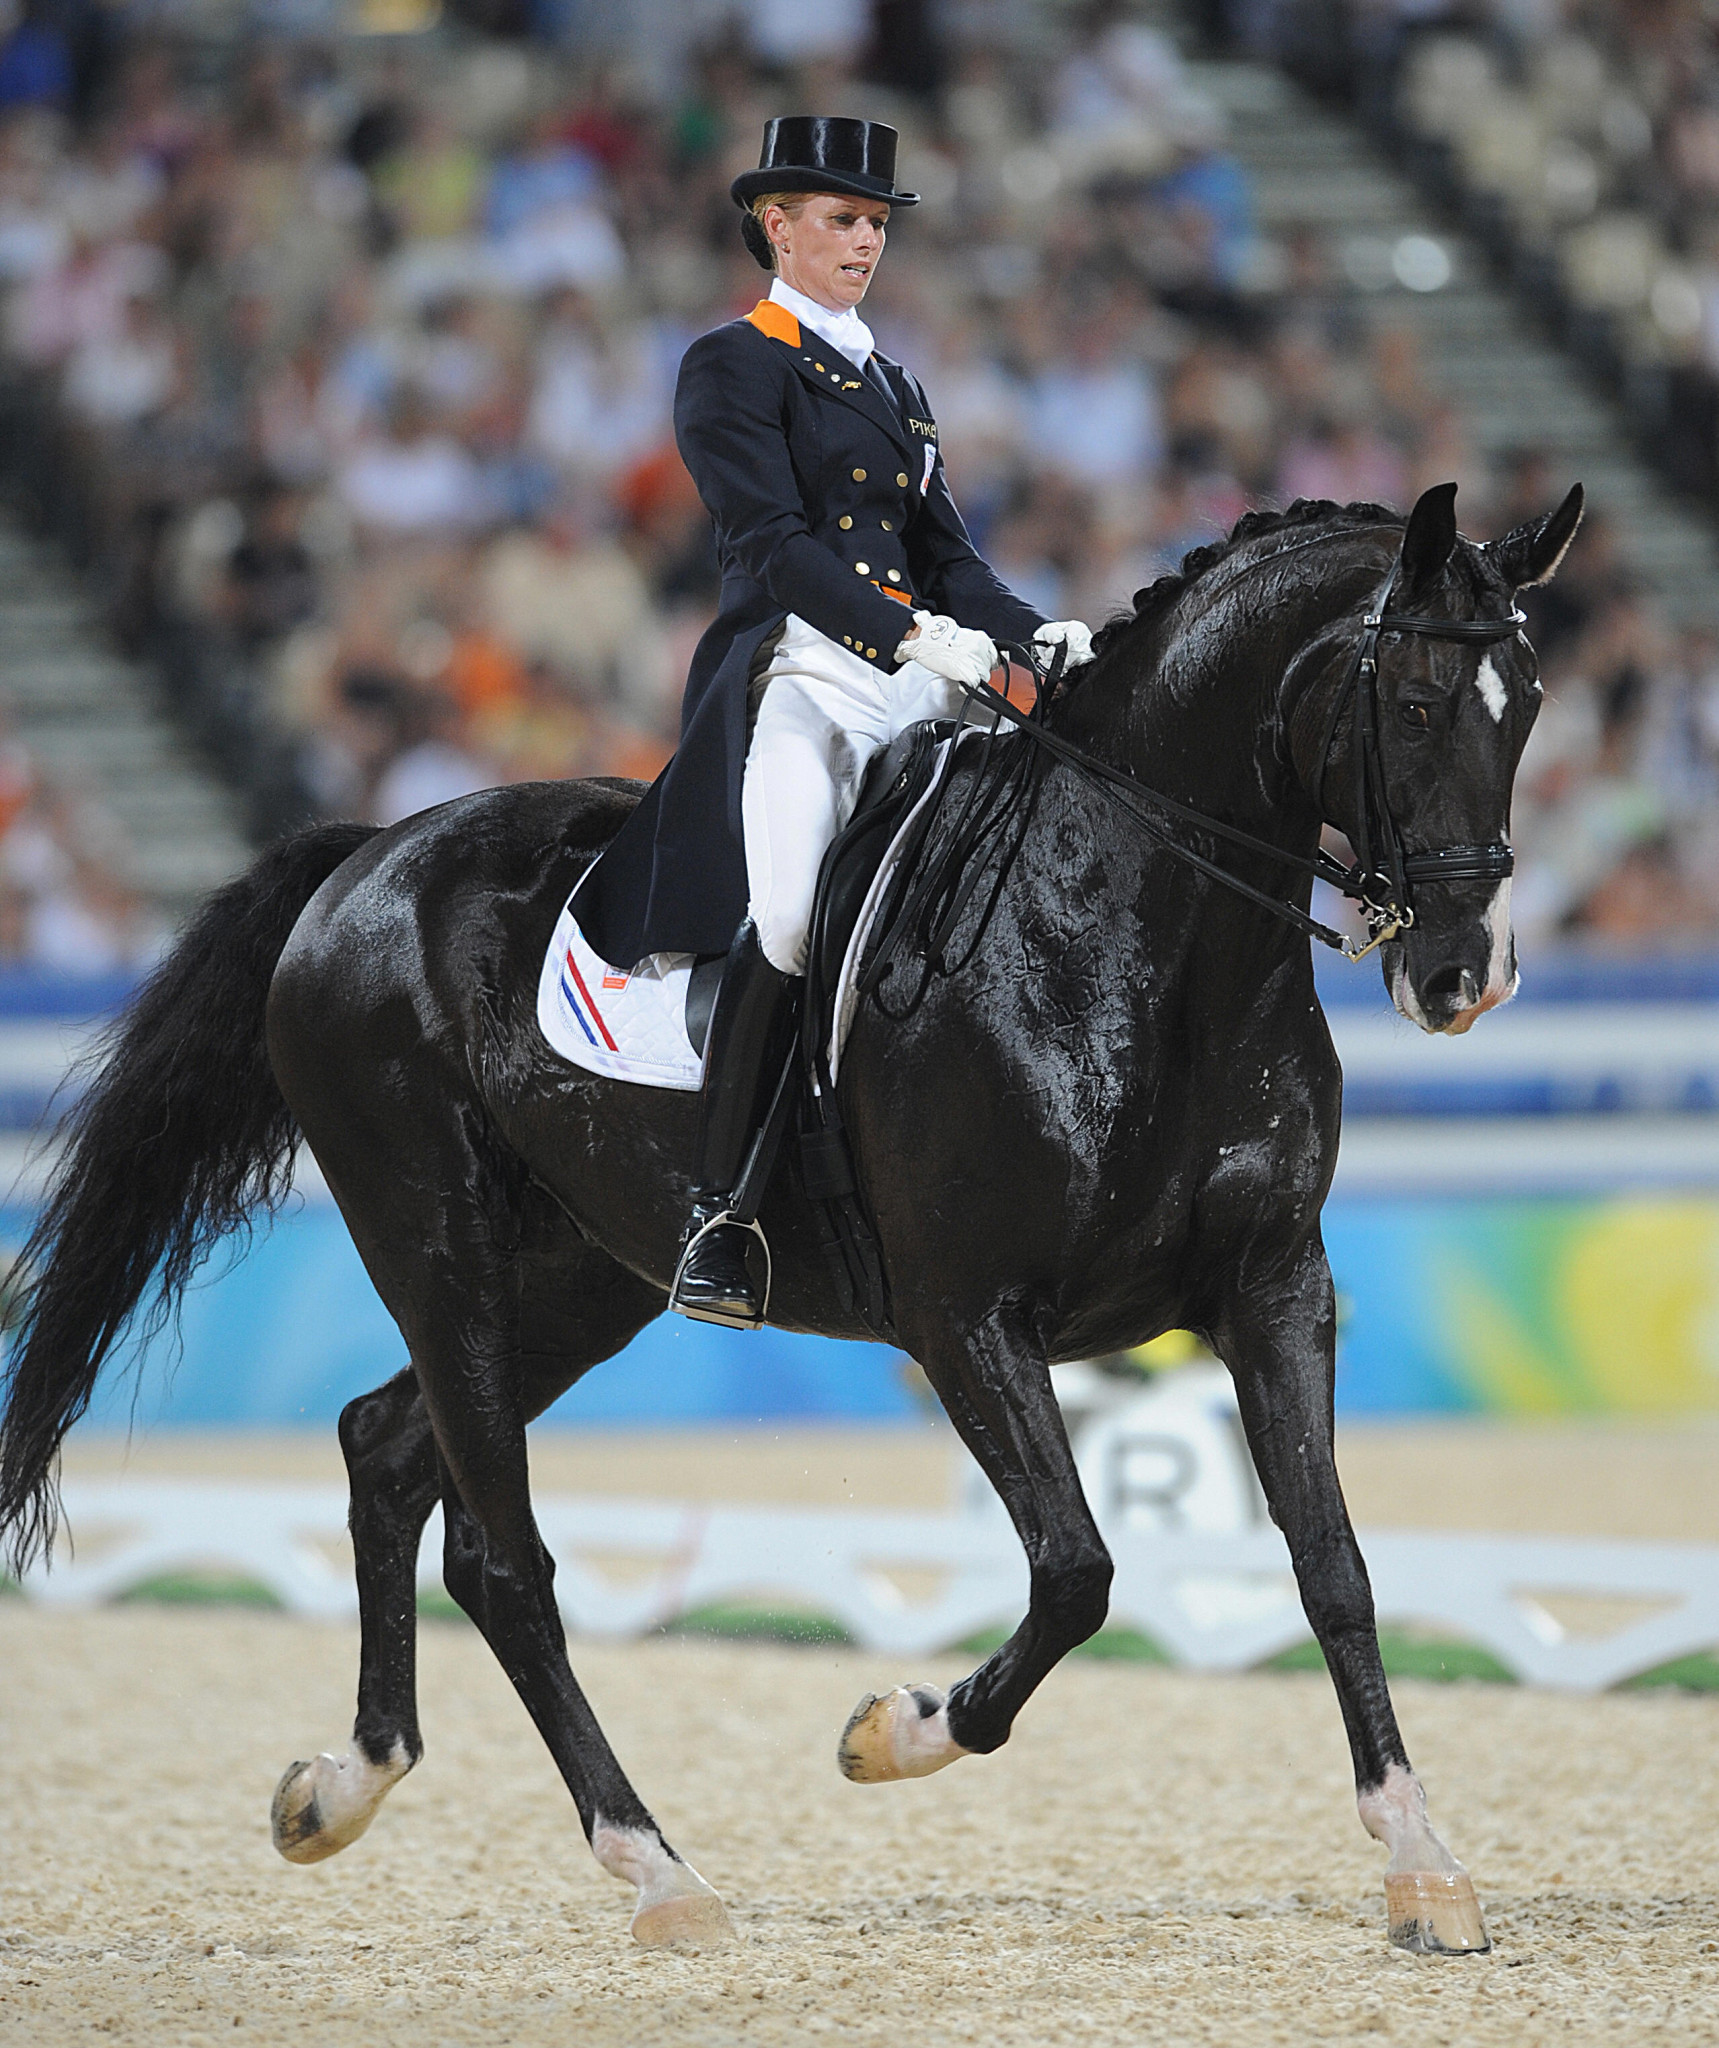 Salinero and Anky van Grunsven won two Olympic gold medals together, at Athens 2004 and Beijing 2008 ©Getty Images